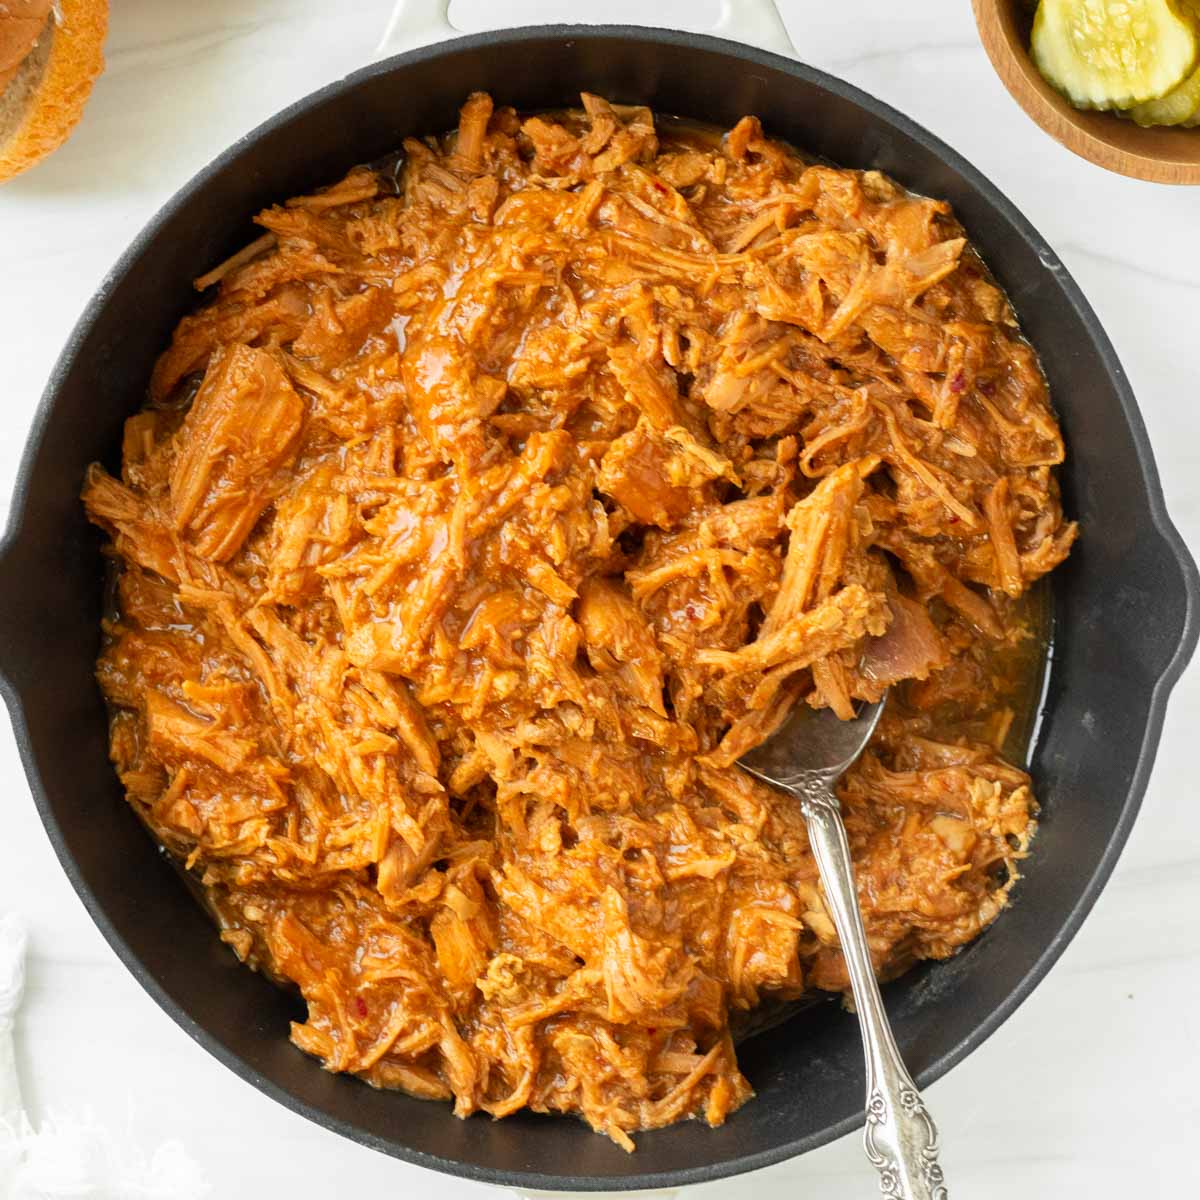 This crockpot BBQ pulled pork recipe is a great slower cooker pork recipe made with crockpot pulled pork and a tangy and sweet barbeque sauce for easy weeknight dinners and delicious summer cookouts.